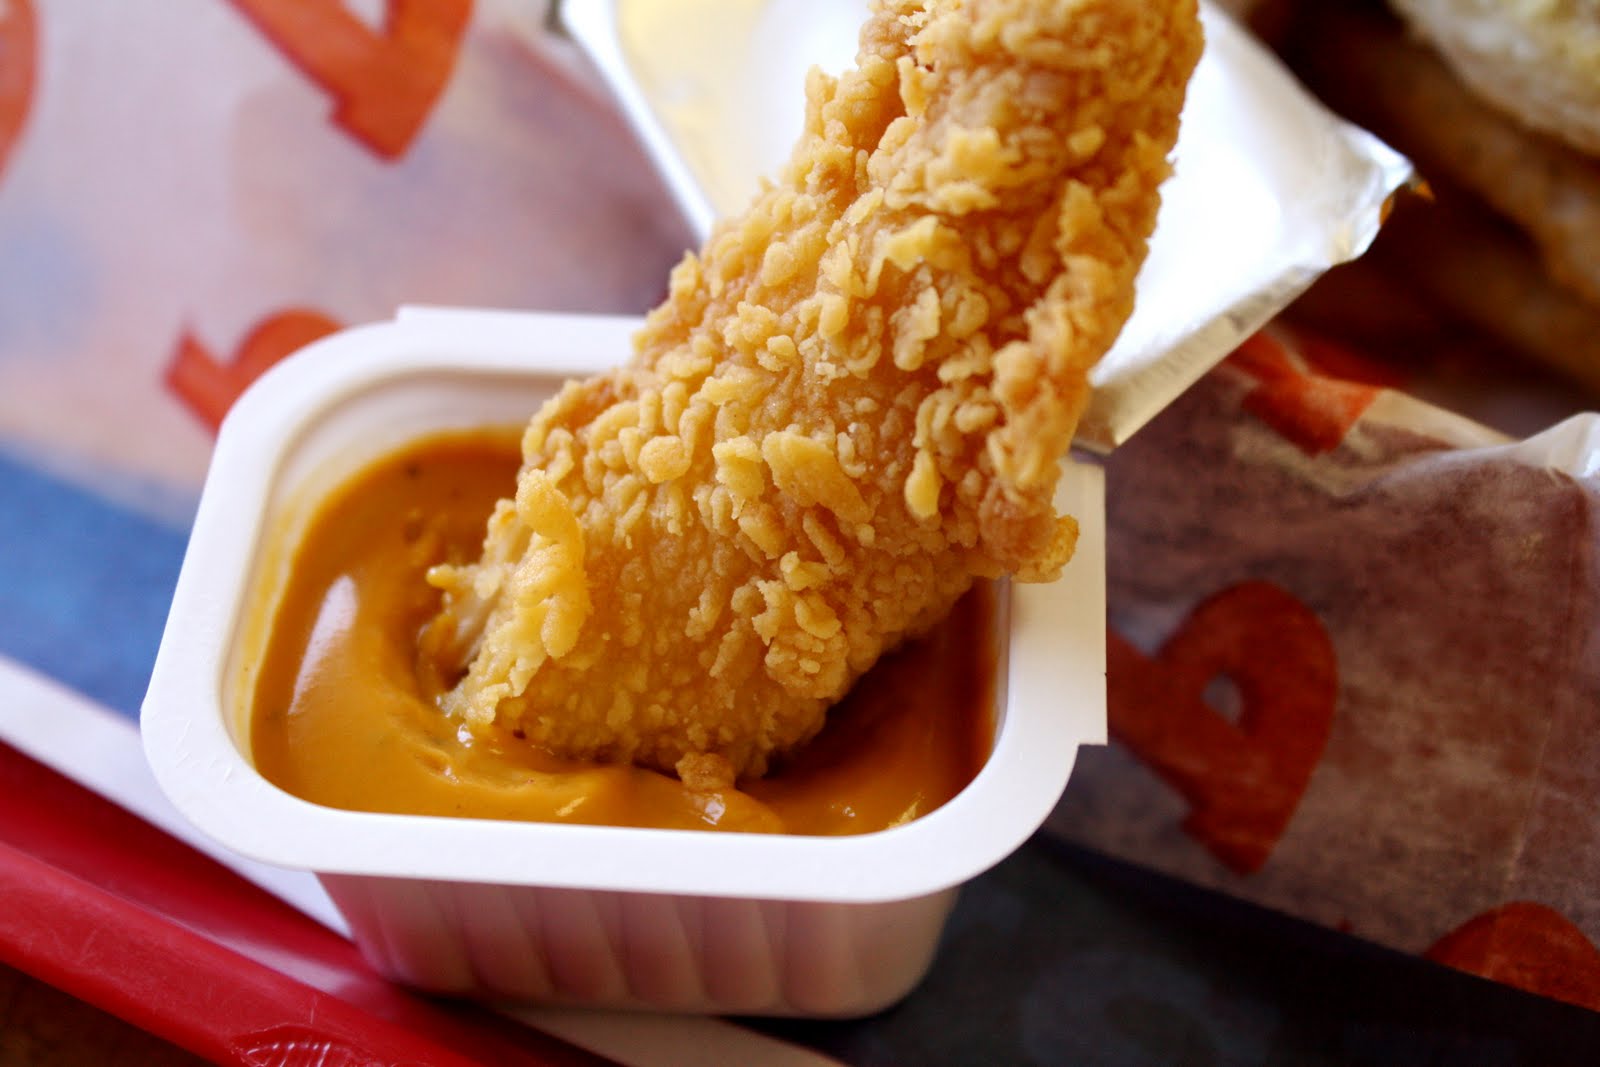 Popeyes Chicken: The Wicked & The Naked.